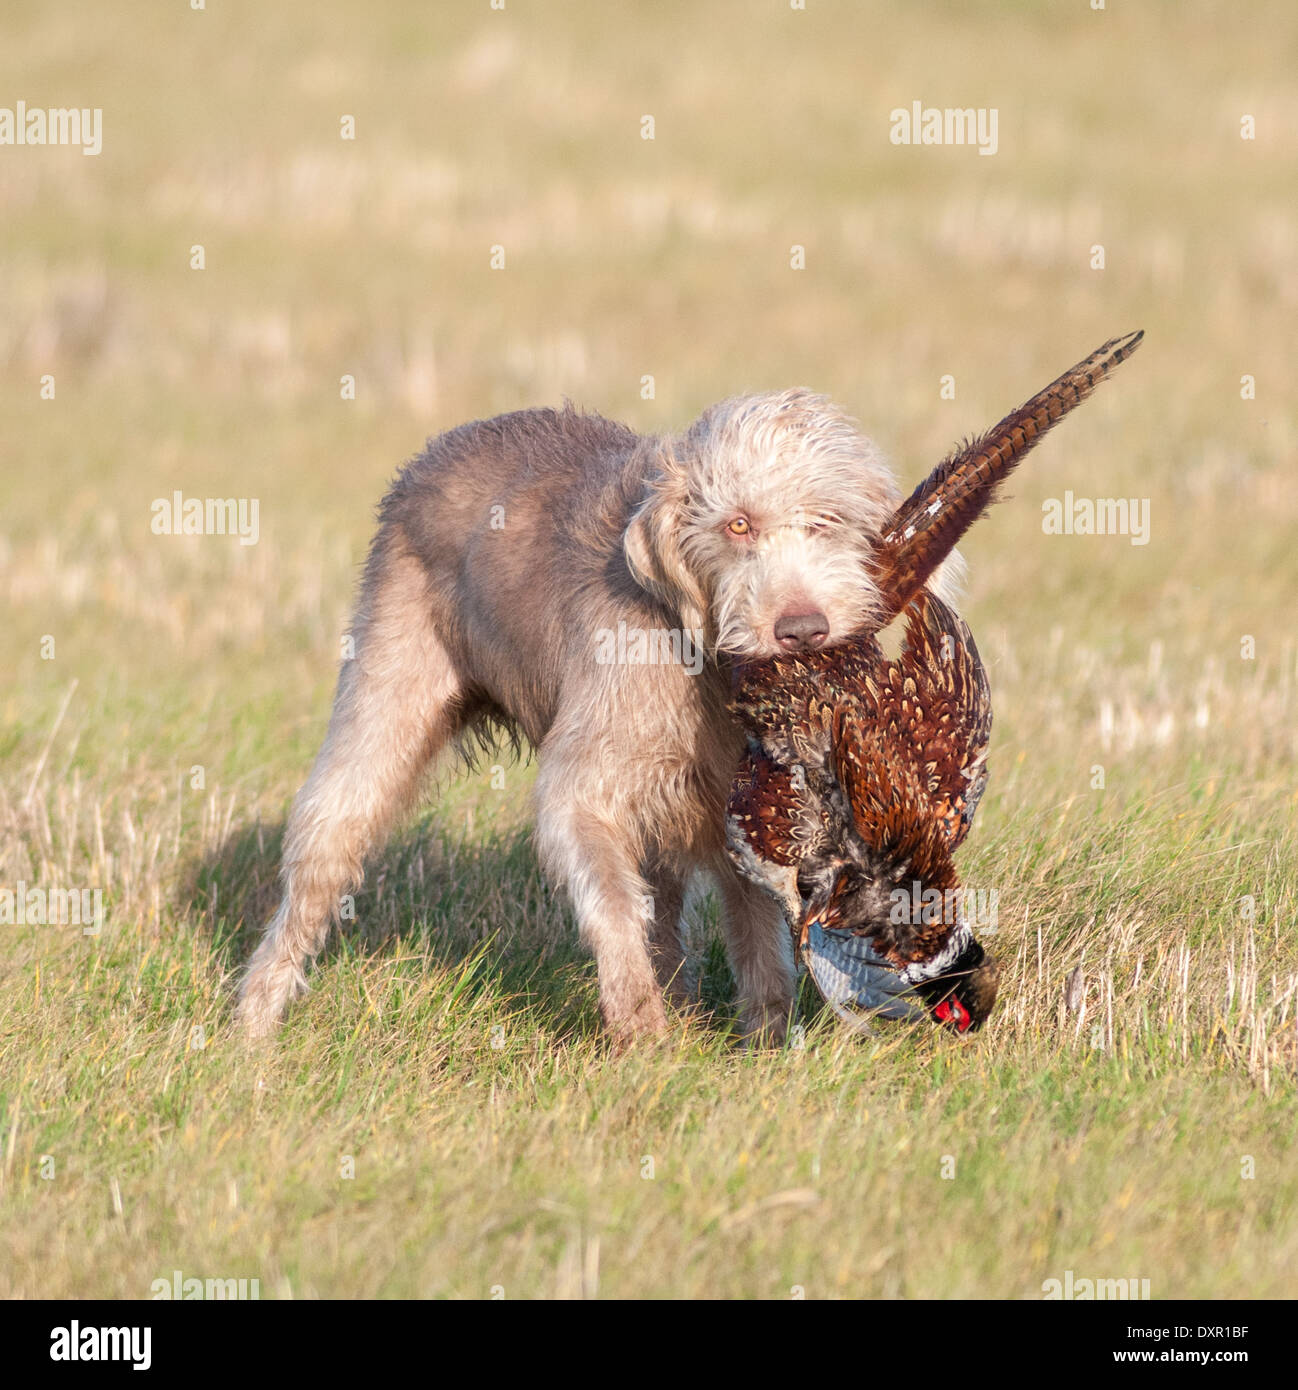 A Slovak Wirehaired Pointer, or Slovakian Rough-haired Pointer dog, with a pheasant Stock Photo